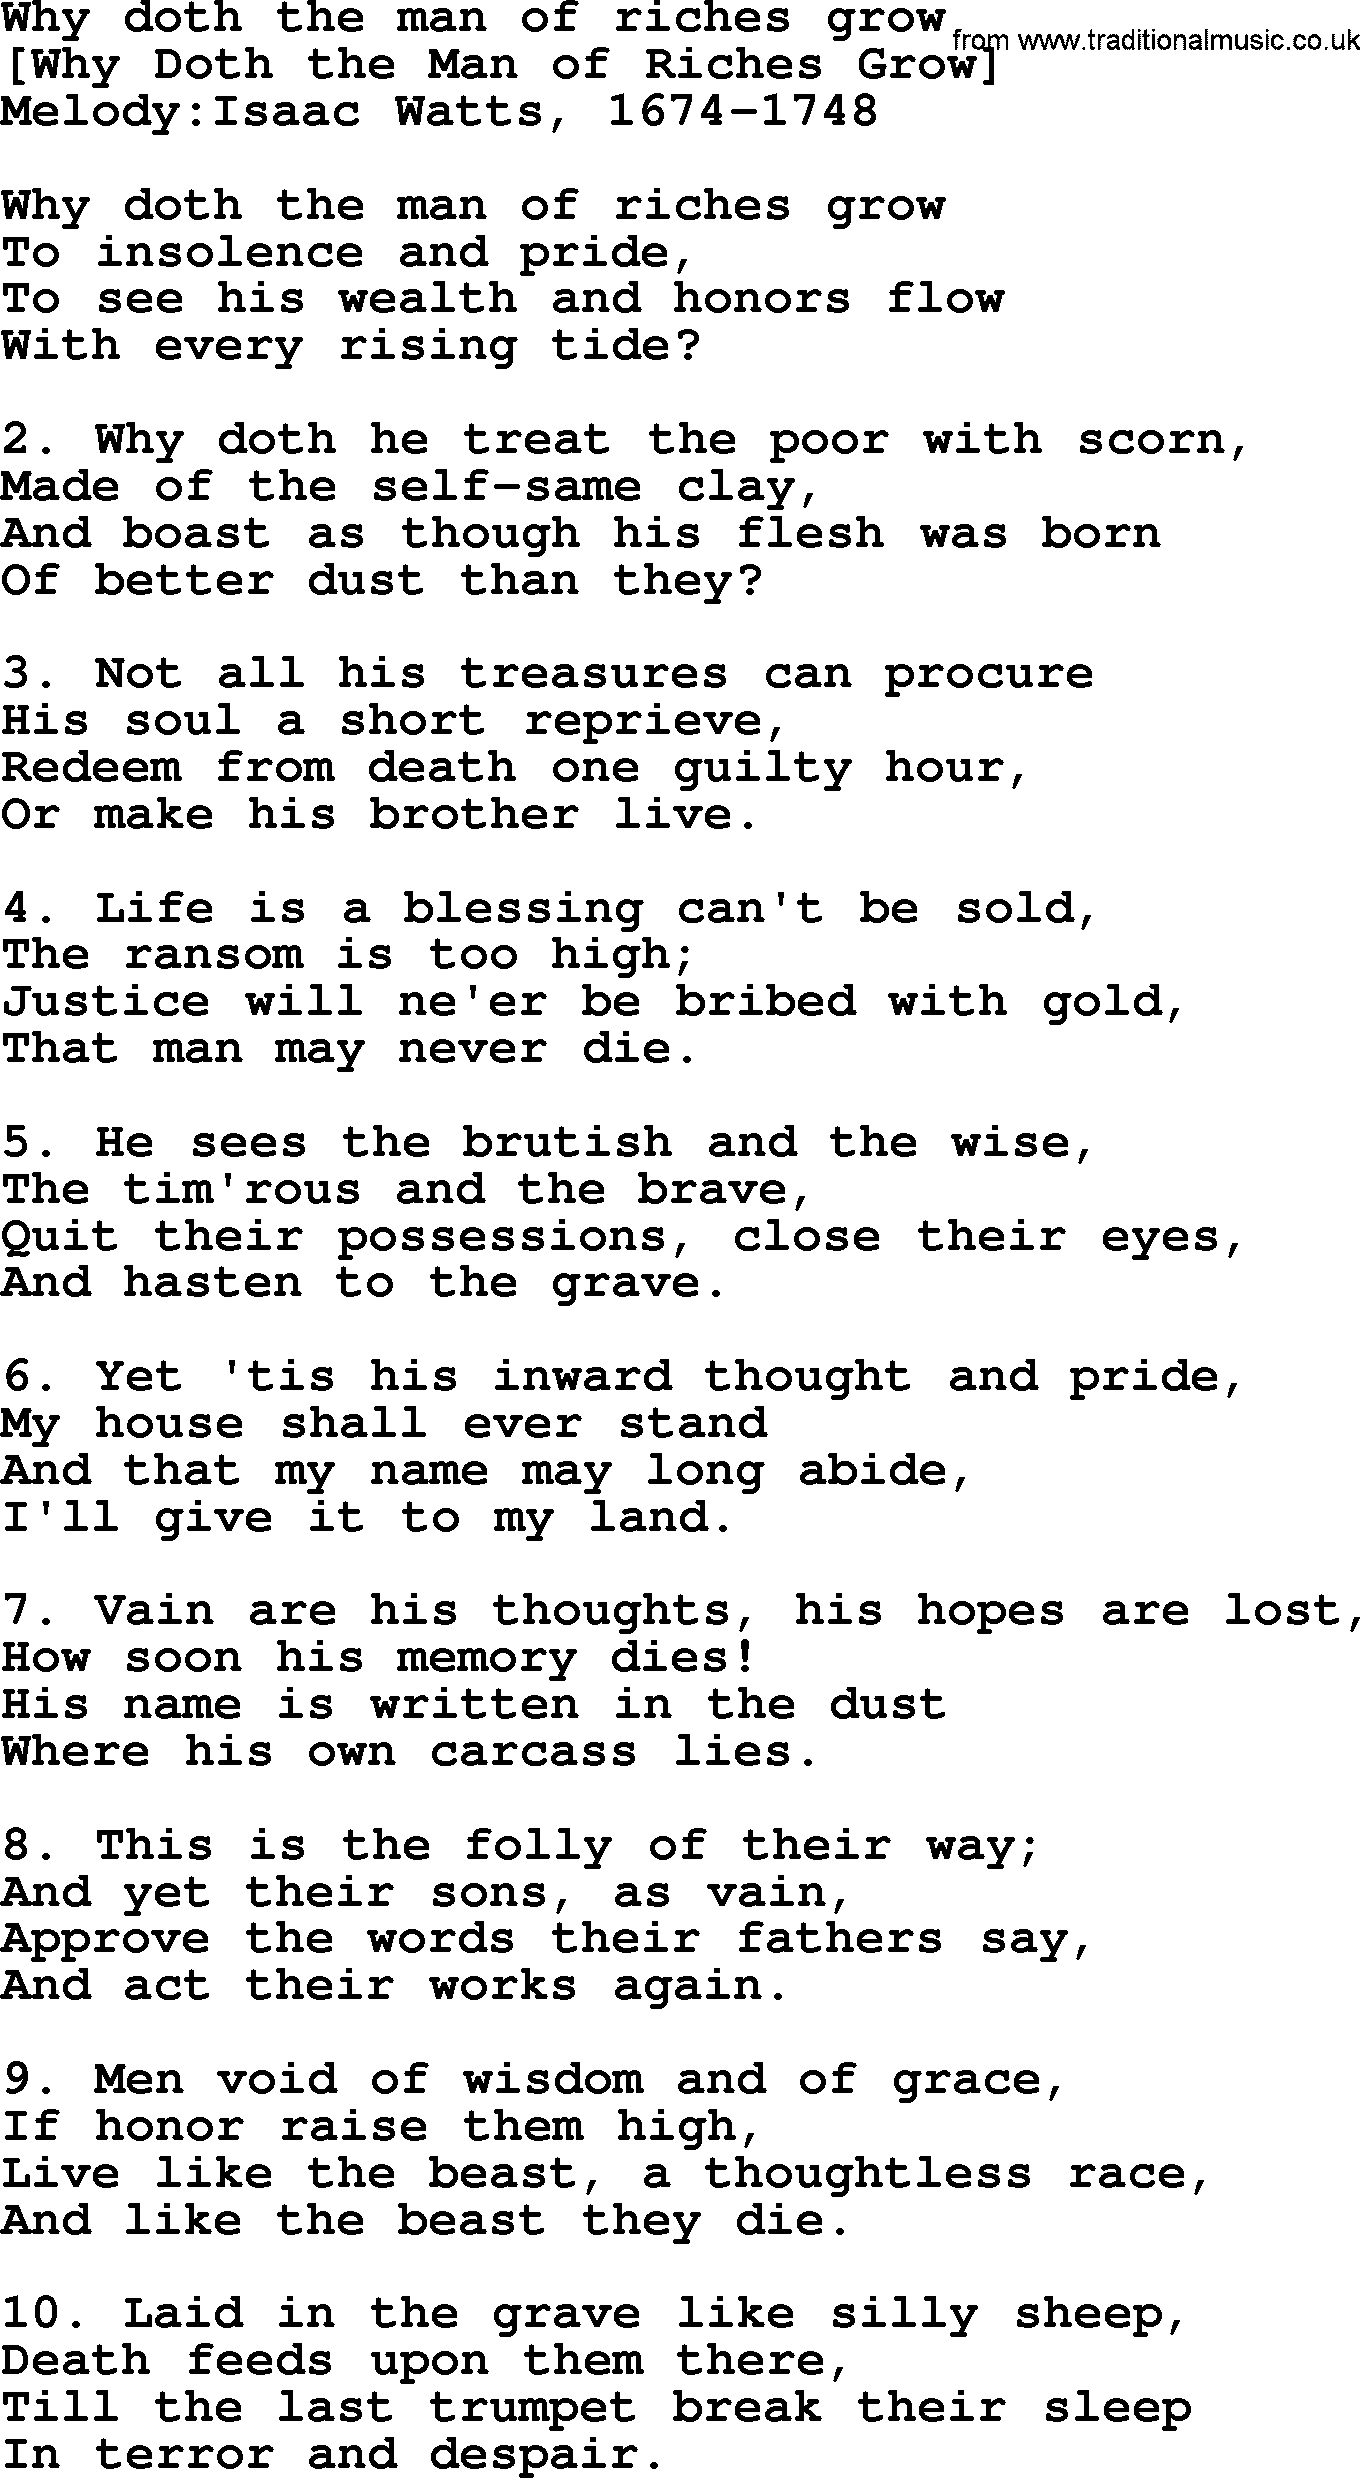 Old English Song: Why Doth The Man Of Riches Grow lyrics